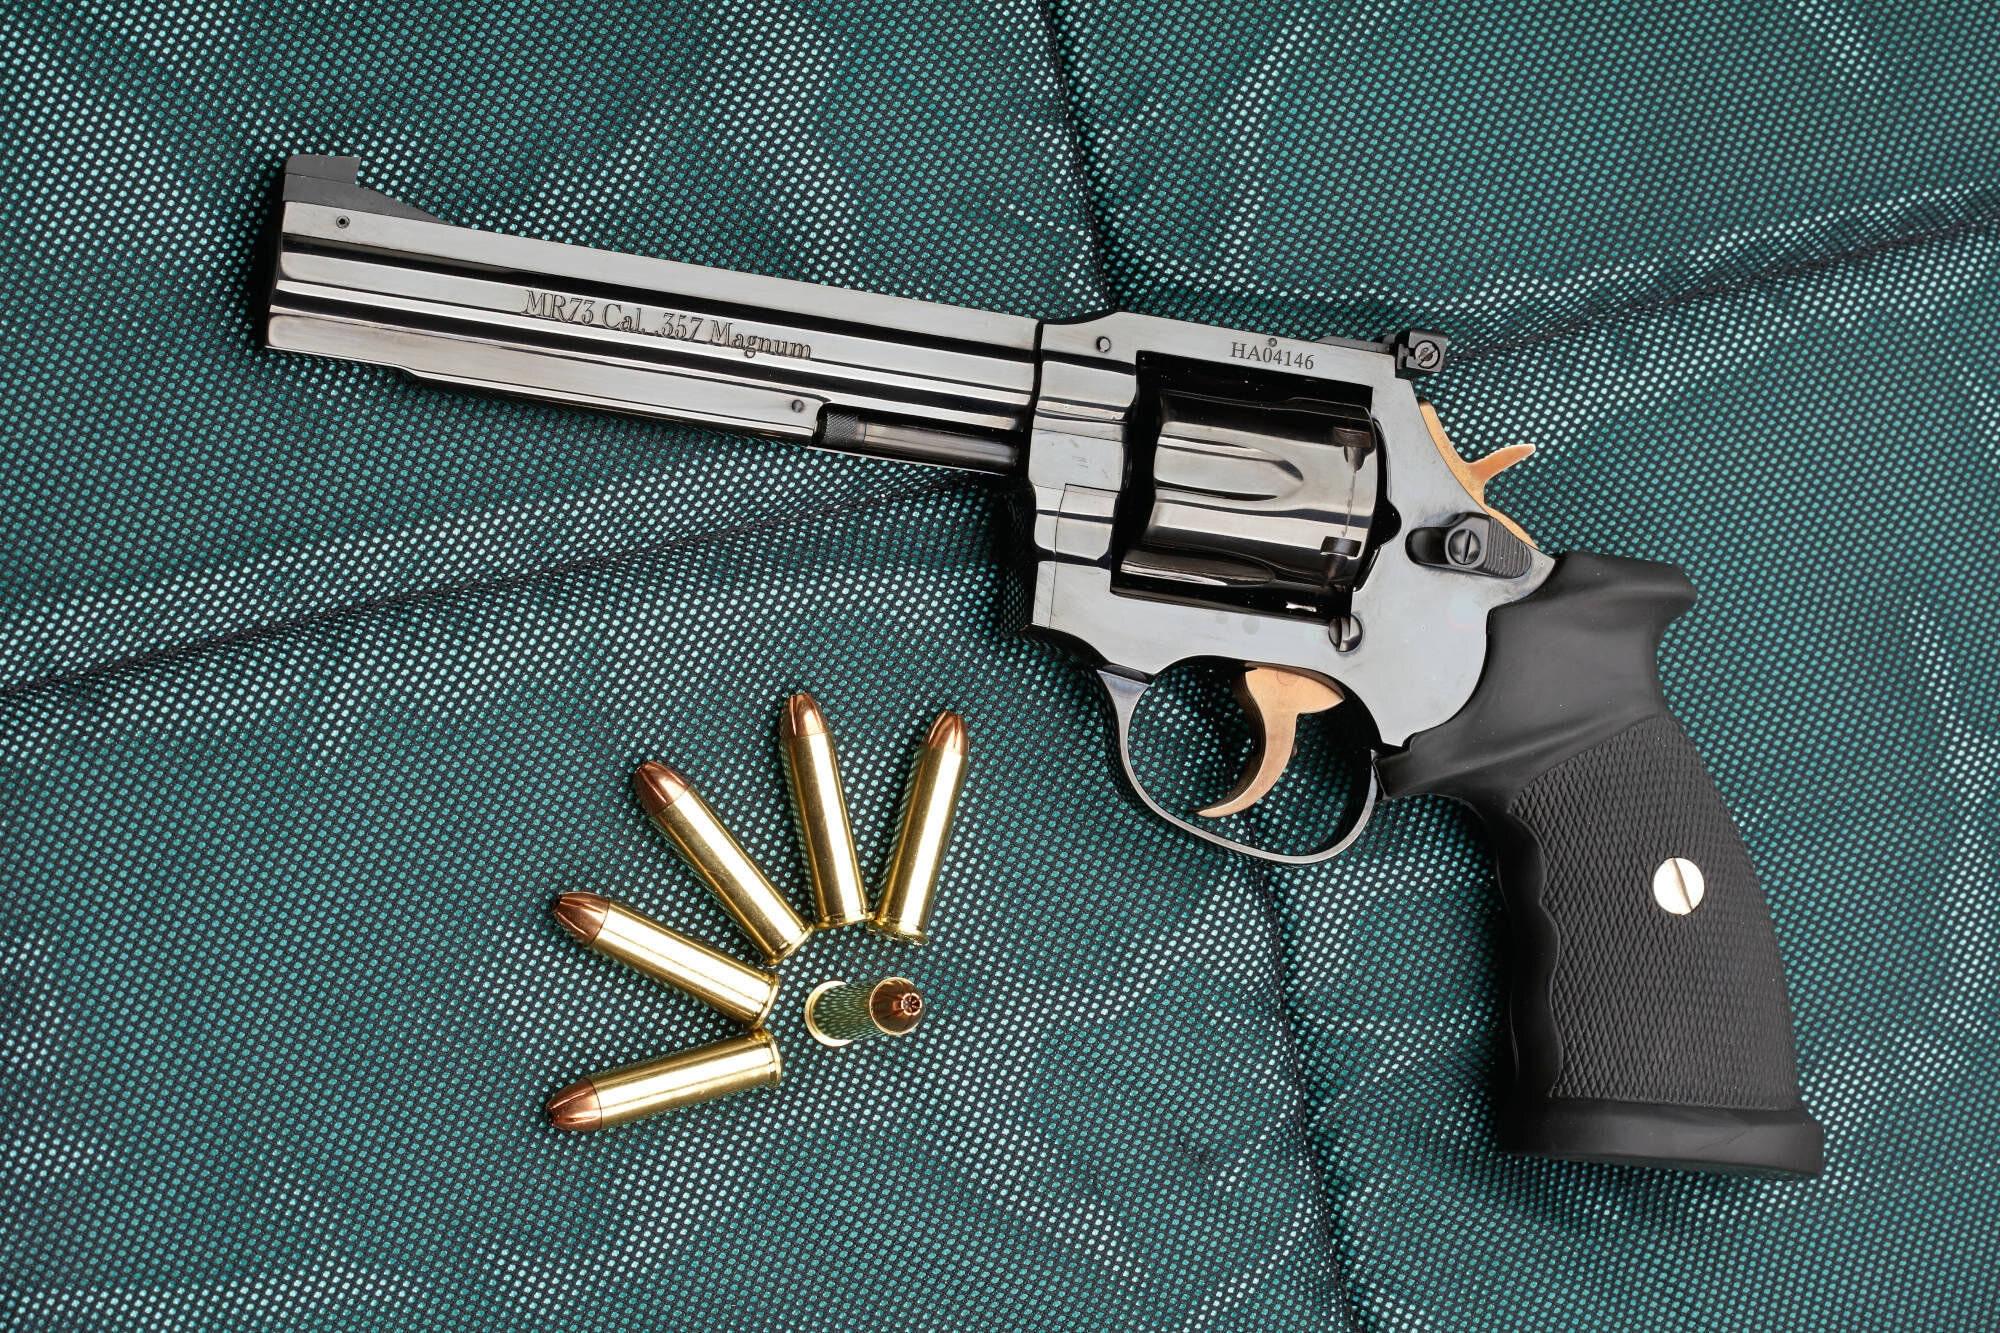 French finesse: the classic Manurhin MR73 in .357 Magnum is celebrating a j...